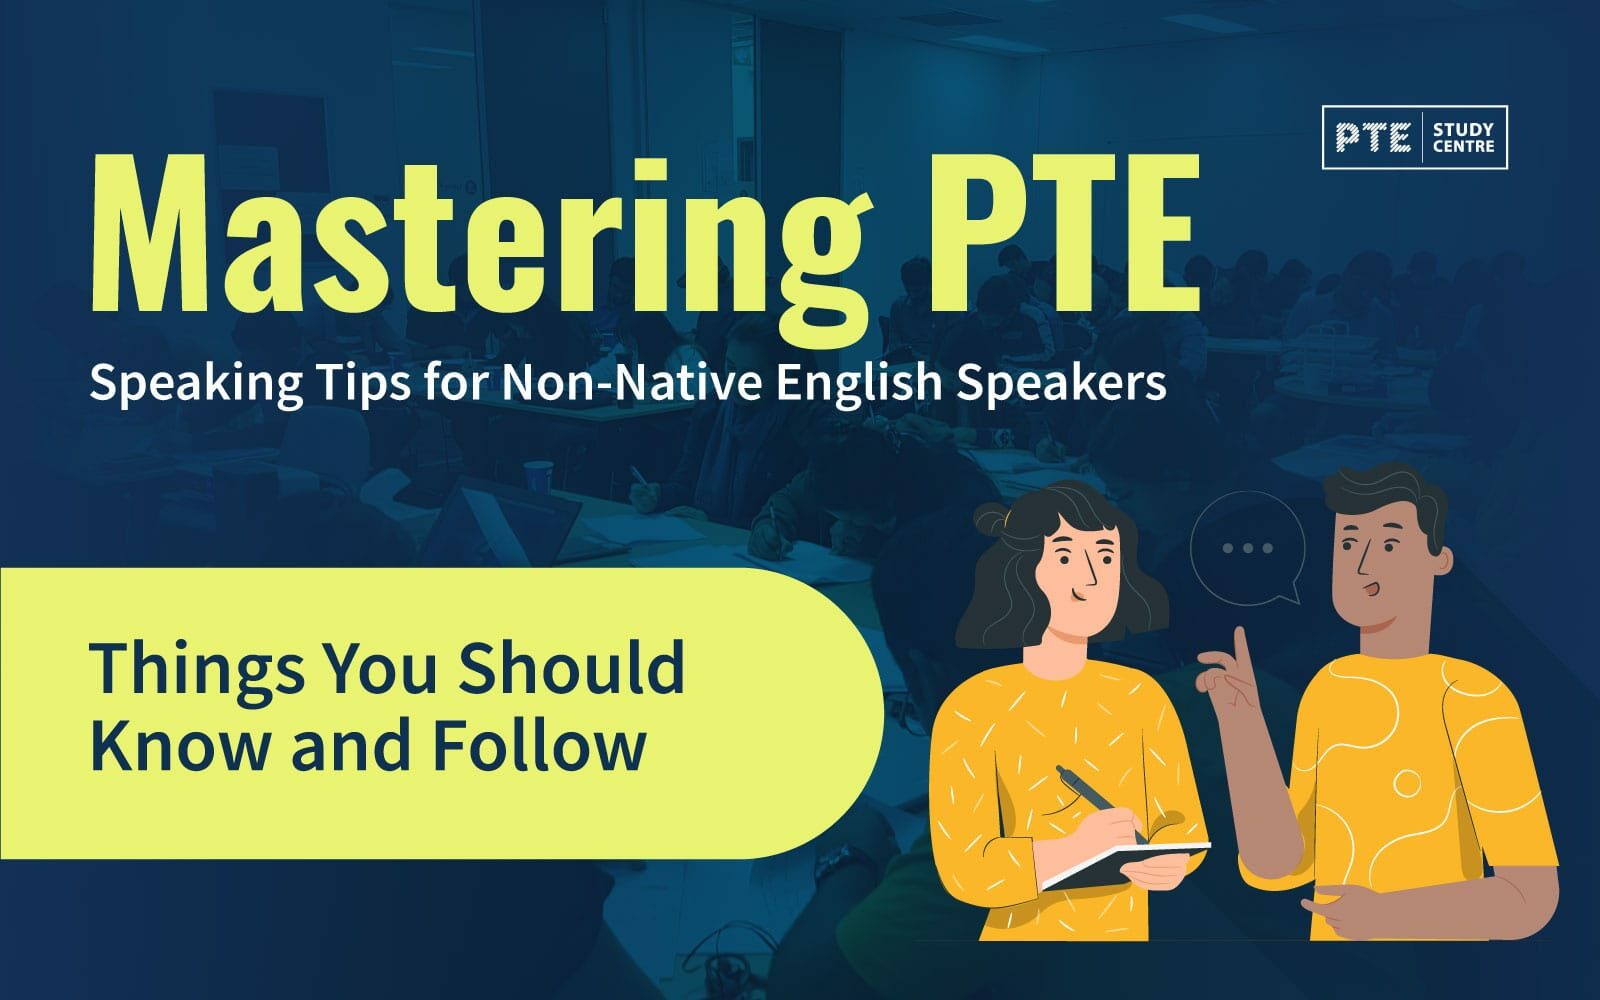 Mastering PTE: Speaking Tips for Non-Native English Speakers